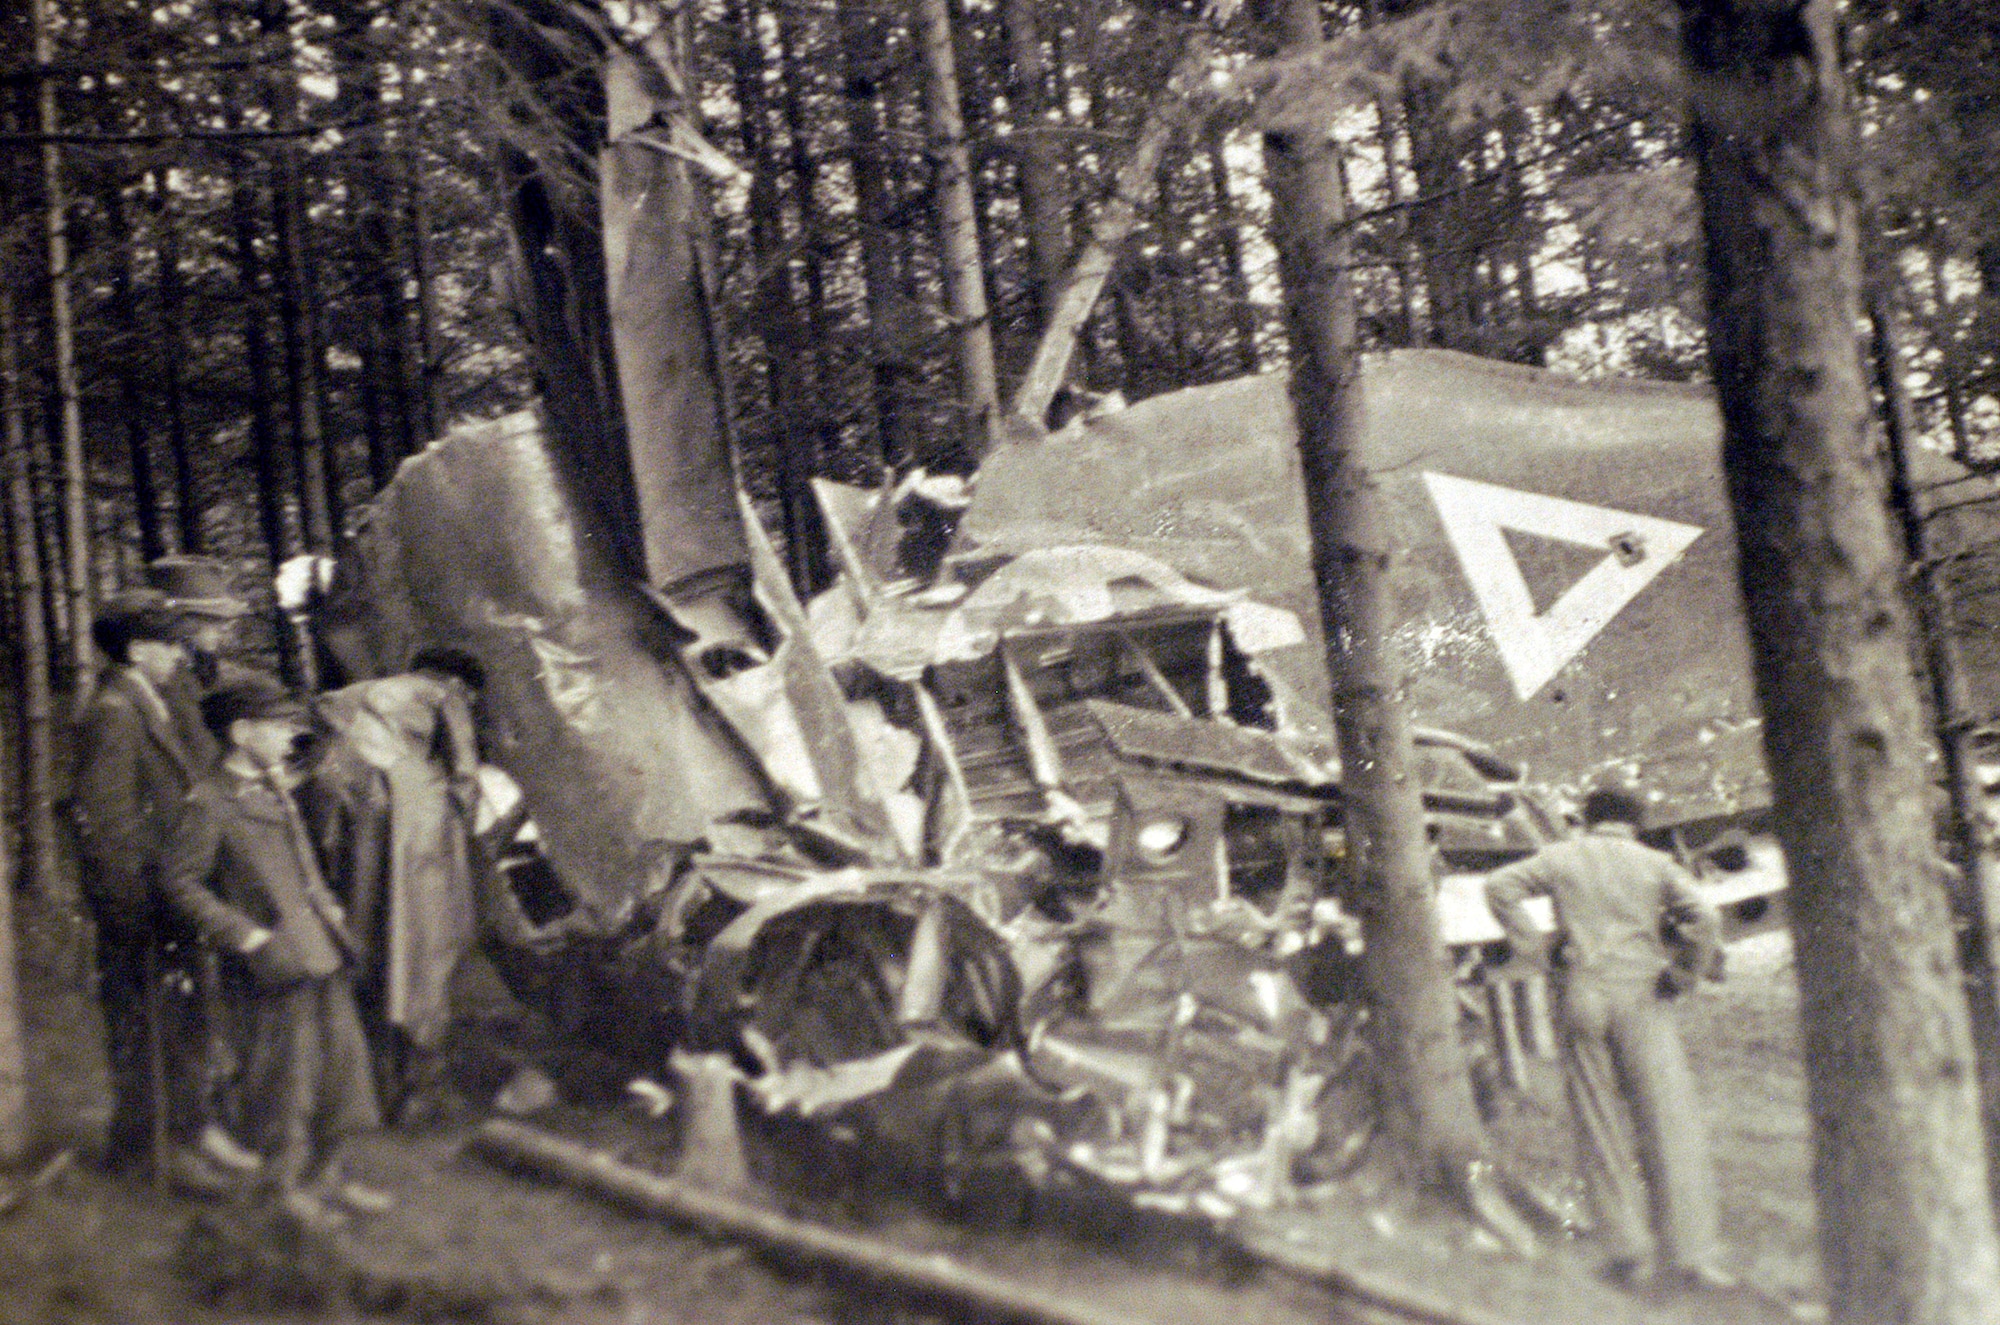 A photo donated to Joint POW/MIA Accounting Command by the landowner of depicts the site of a B-17 bomber crash May 10, 1944, near Vostenhof, Austria. The crash claimed the lives of 1st Lt. Stanley Dwyer and gunner Sgt. John Boros. (Courtesy photo)